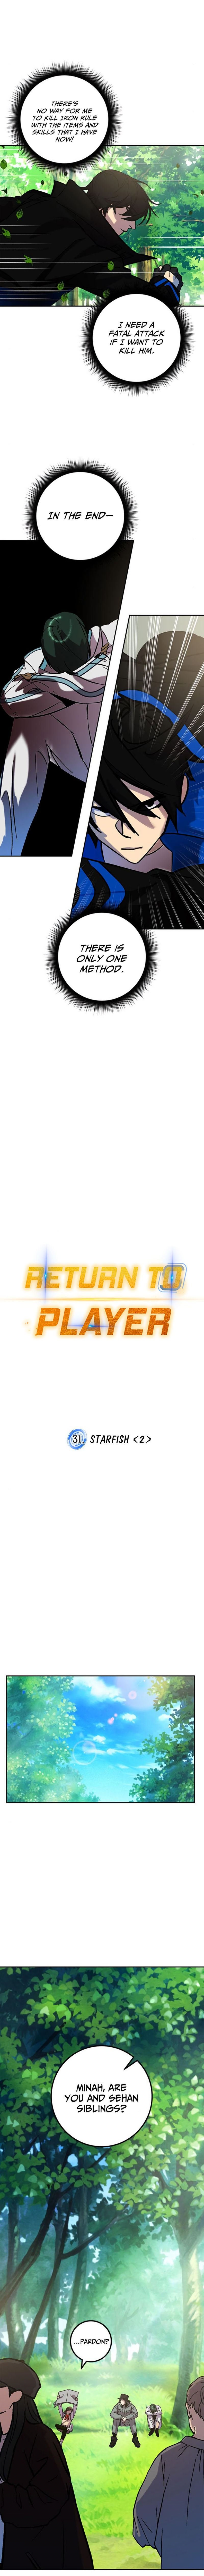 return-to-player-chap-31-8